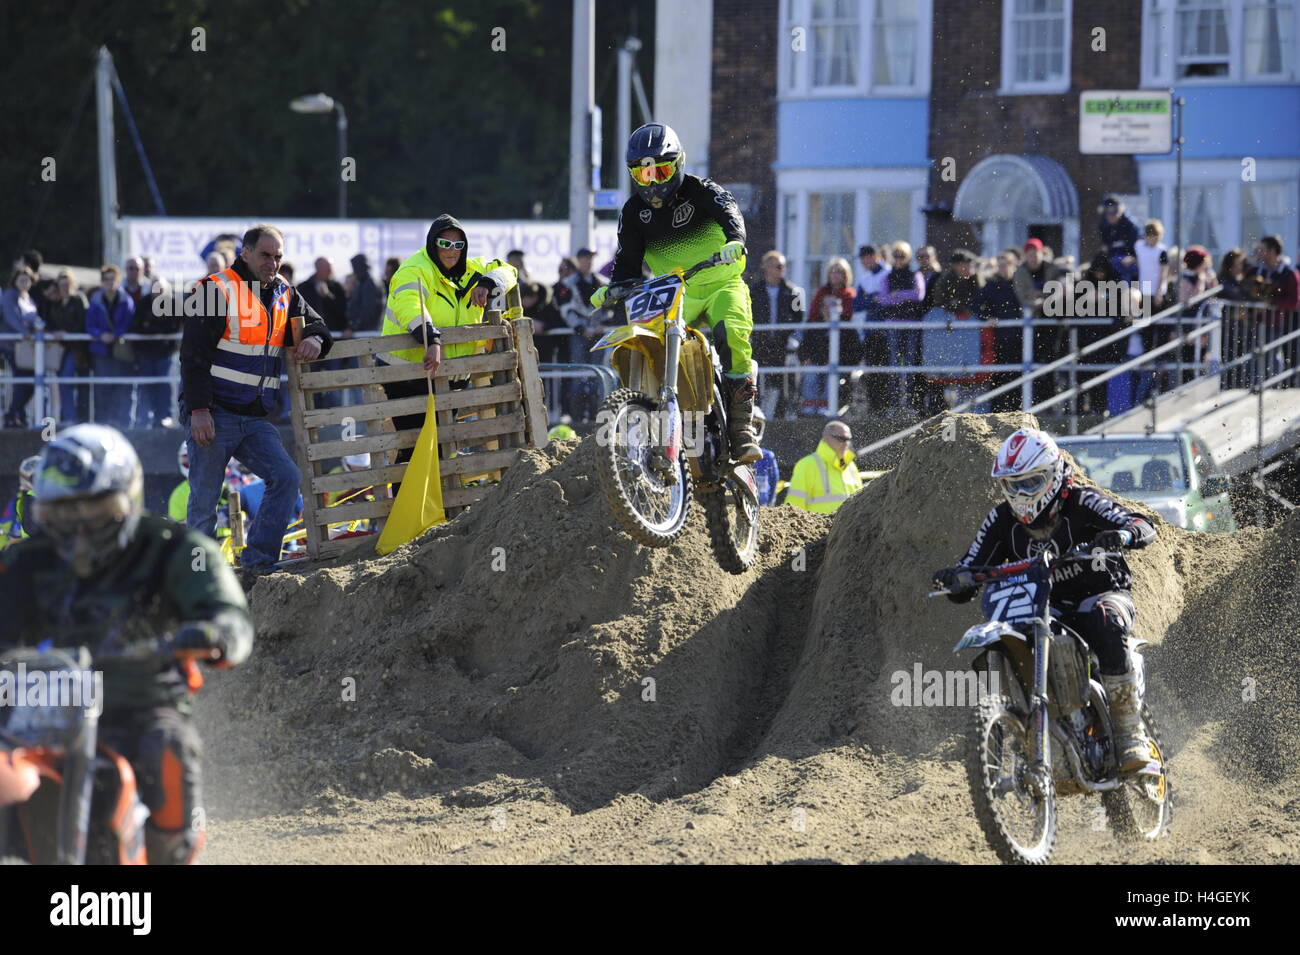 Weymouth, Dorset, UK.  16th October 2016. Competitors on their bikes testing themselves on the demanding circuit  of the Weymouth Lions Beach Motocross.  Photo by Graham Hunt/Alamy Live News Stock Photo